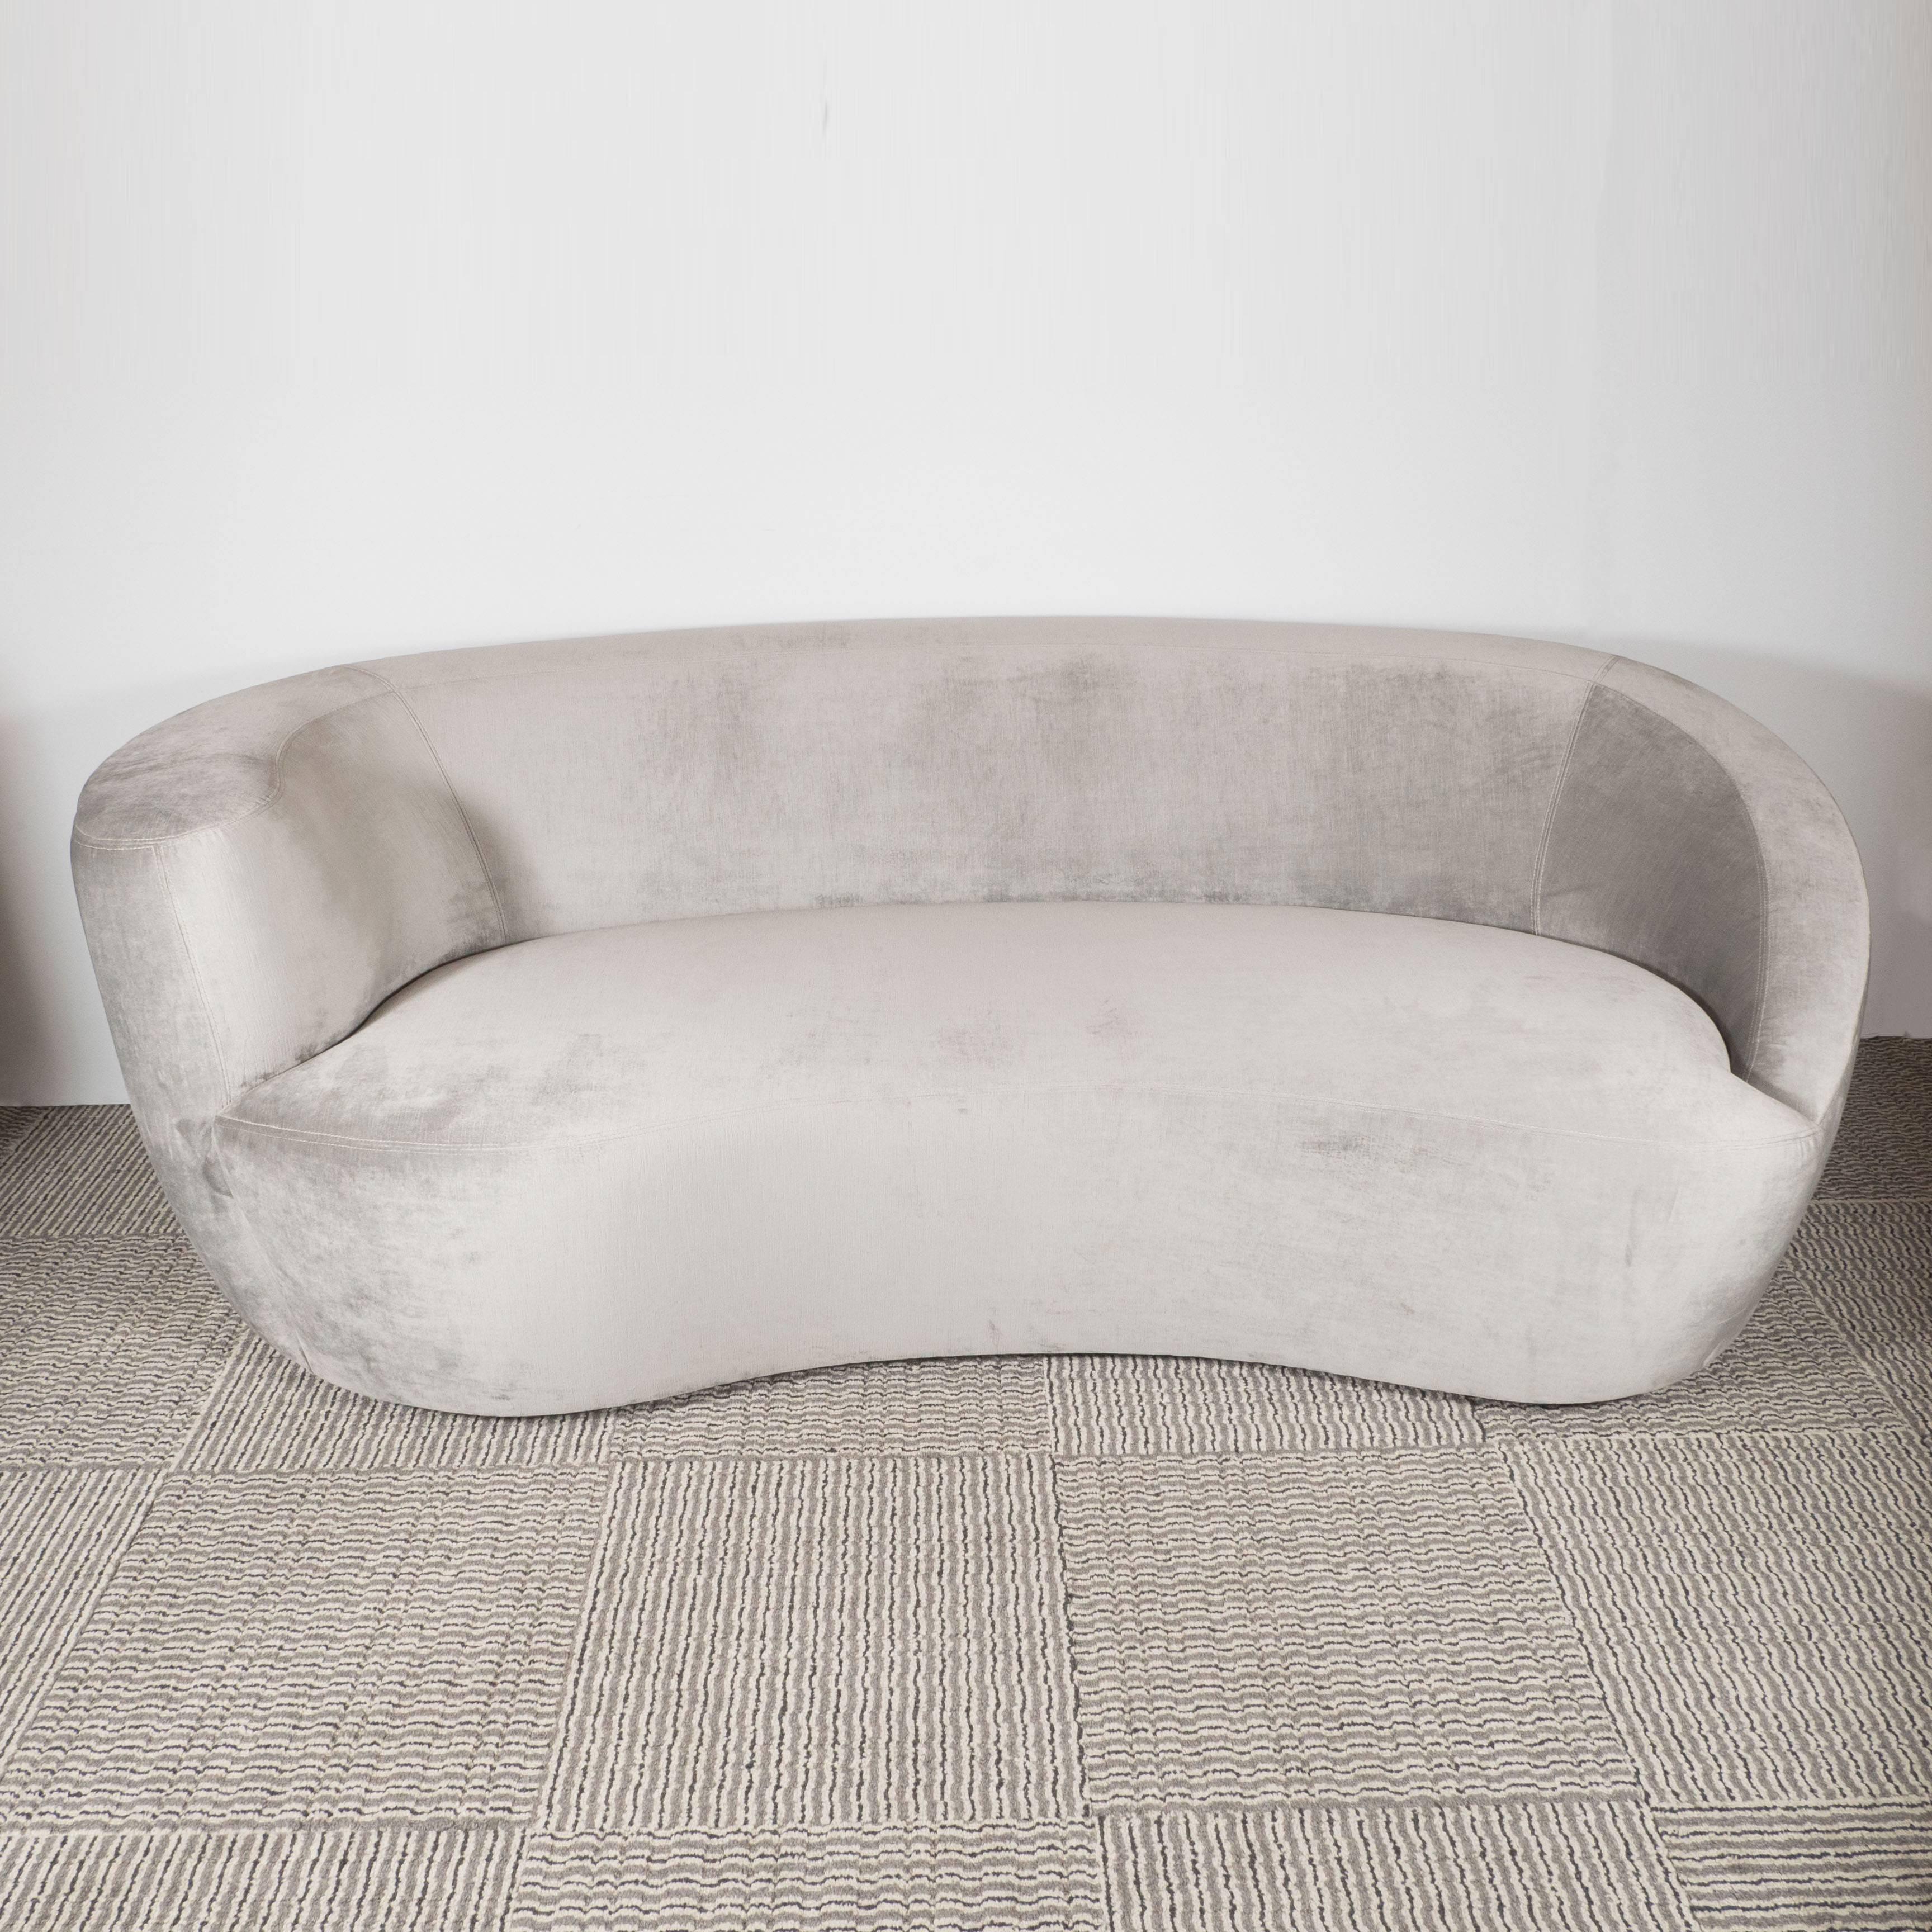 A Mid-Century modernist nautilus sofa by Vladimir Kagan. A bulbous, curved back and wraparound design lends to a clean, seamless aesthetic. A wide, continuous armrest slopes downward in a curved fashion. Entirely covered in a luxe smoked platinum